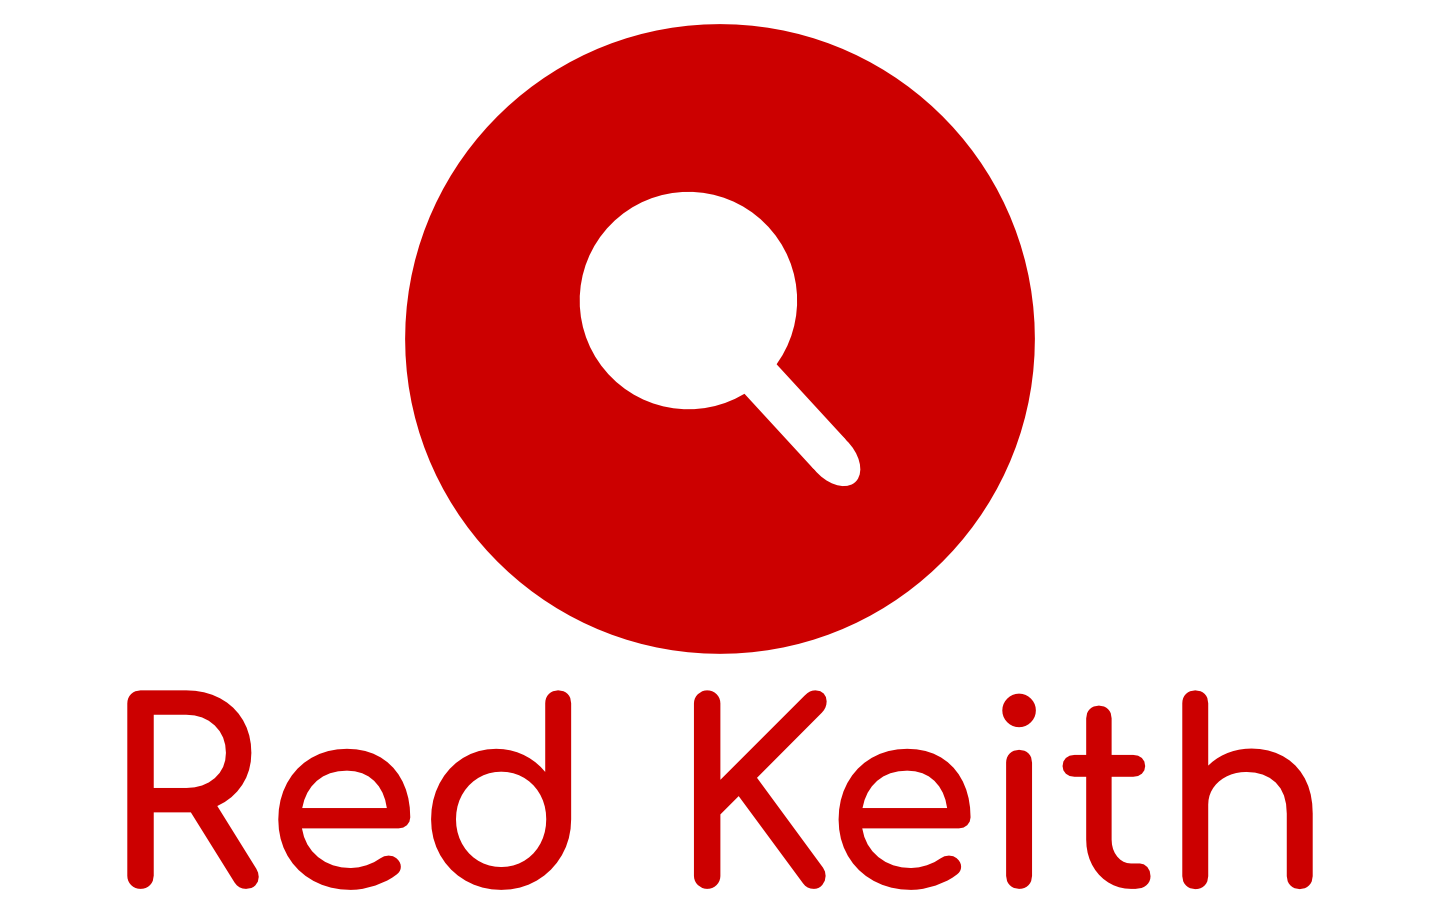 The Red Keith logo is a magnifying glass inset into a red circle, with red letters saying "Red Keith" along the bottom.